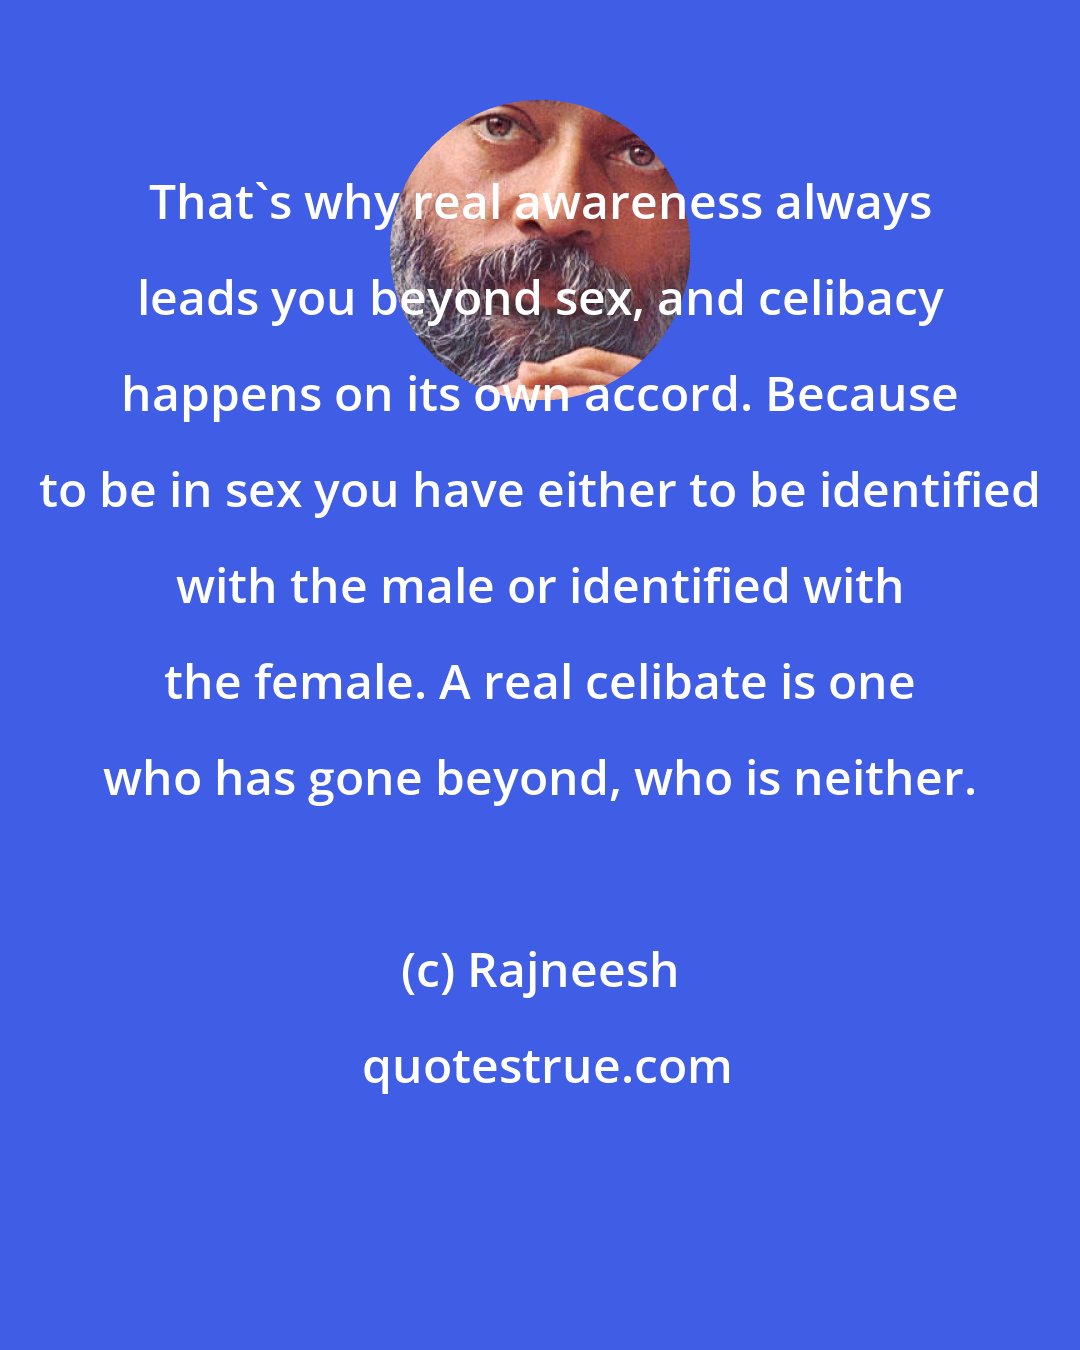 Rajneesh: That's why real awareness always leads you beyond sex, and celibacy happens on its own accord. Because to be in sex you have either to be identified with the male or identified with the female. A real celibate is one who has gone beyond, who is neither.